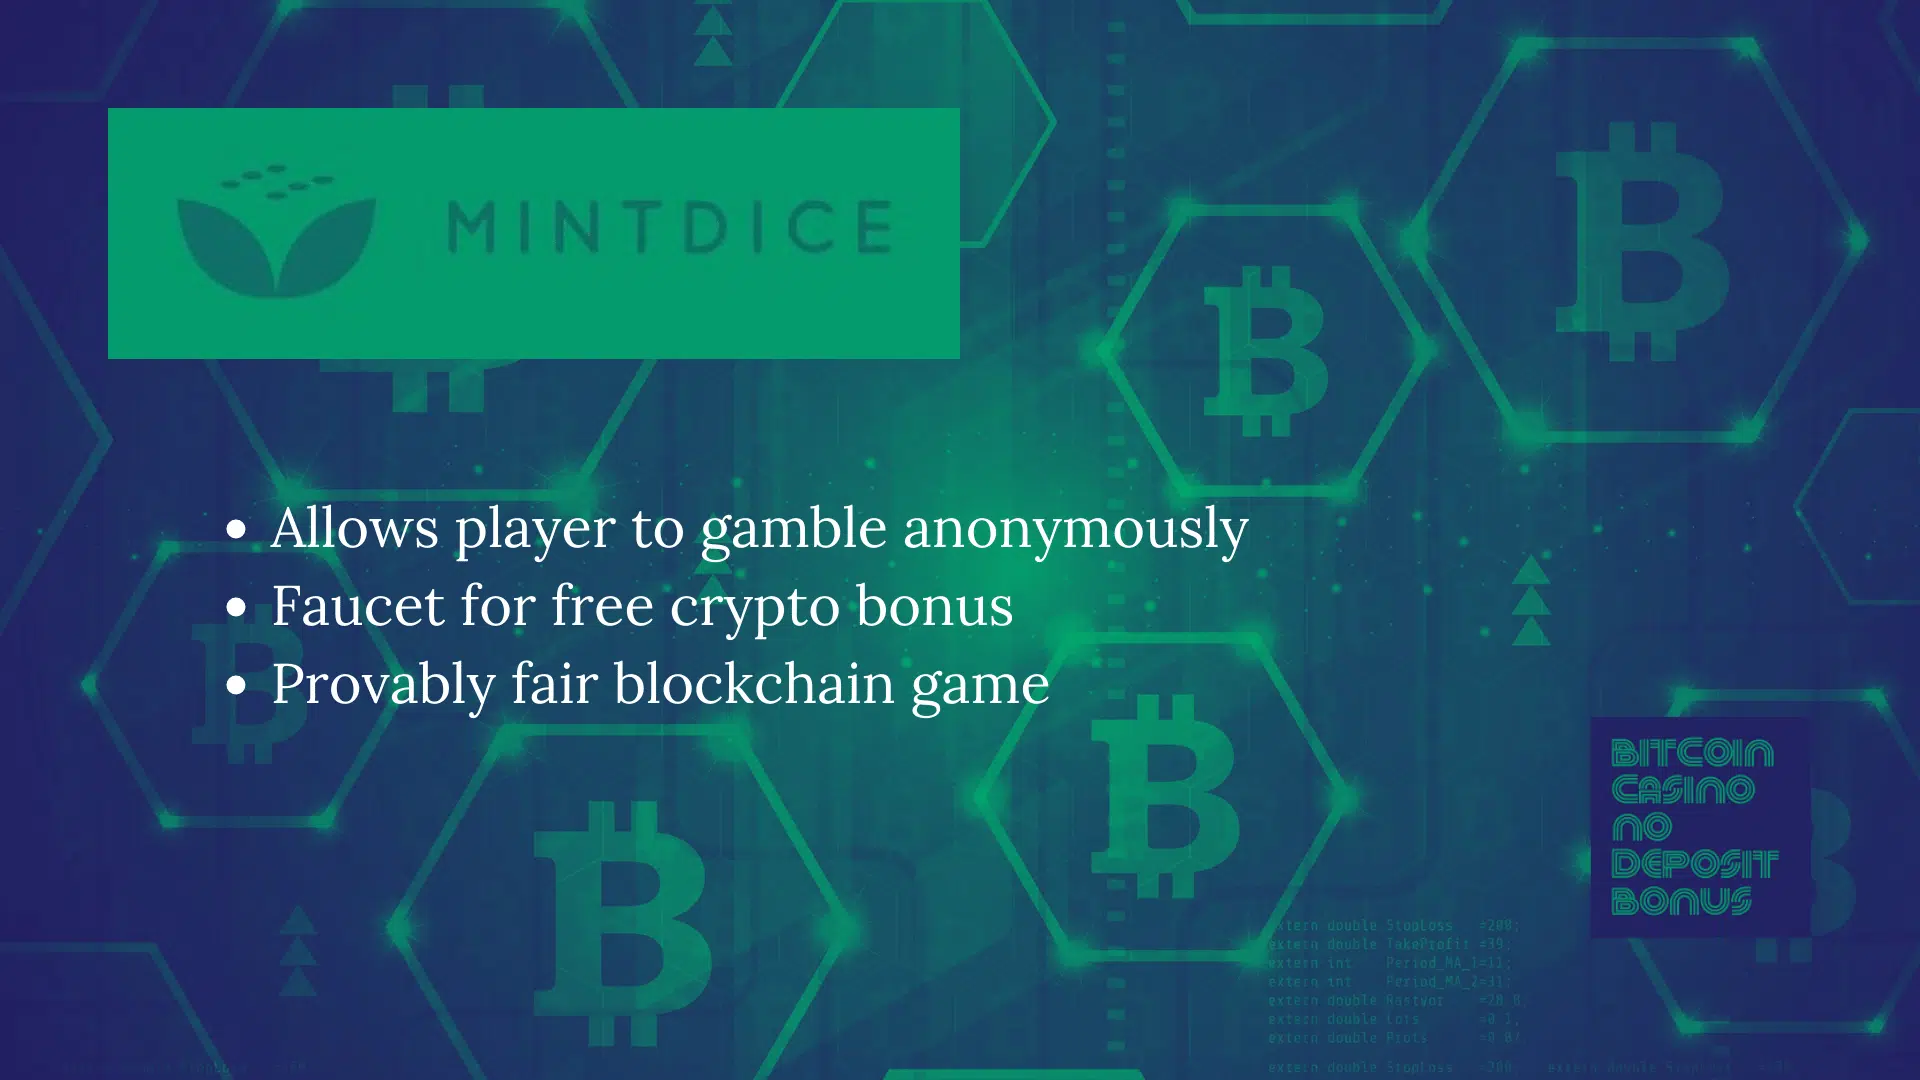 You are currently viewing Mint Dice Bonus Codes – Mintdice.com Free Coupons December 2022